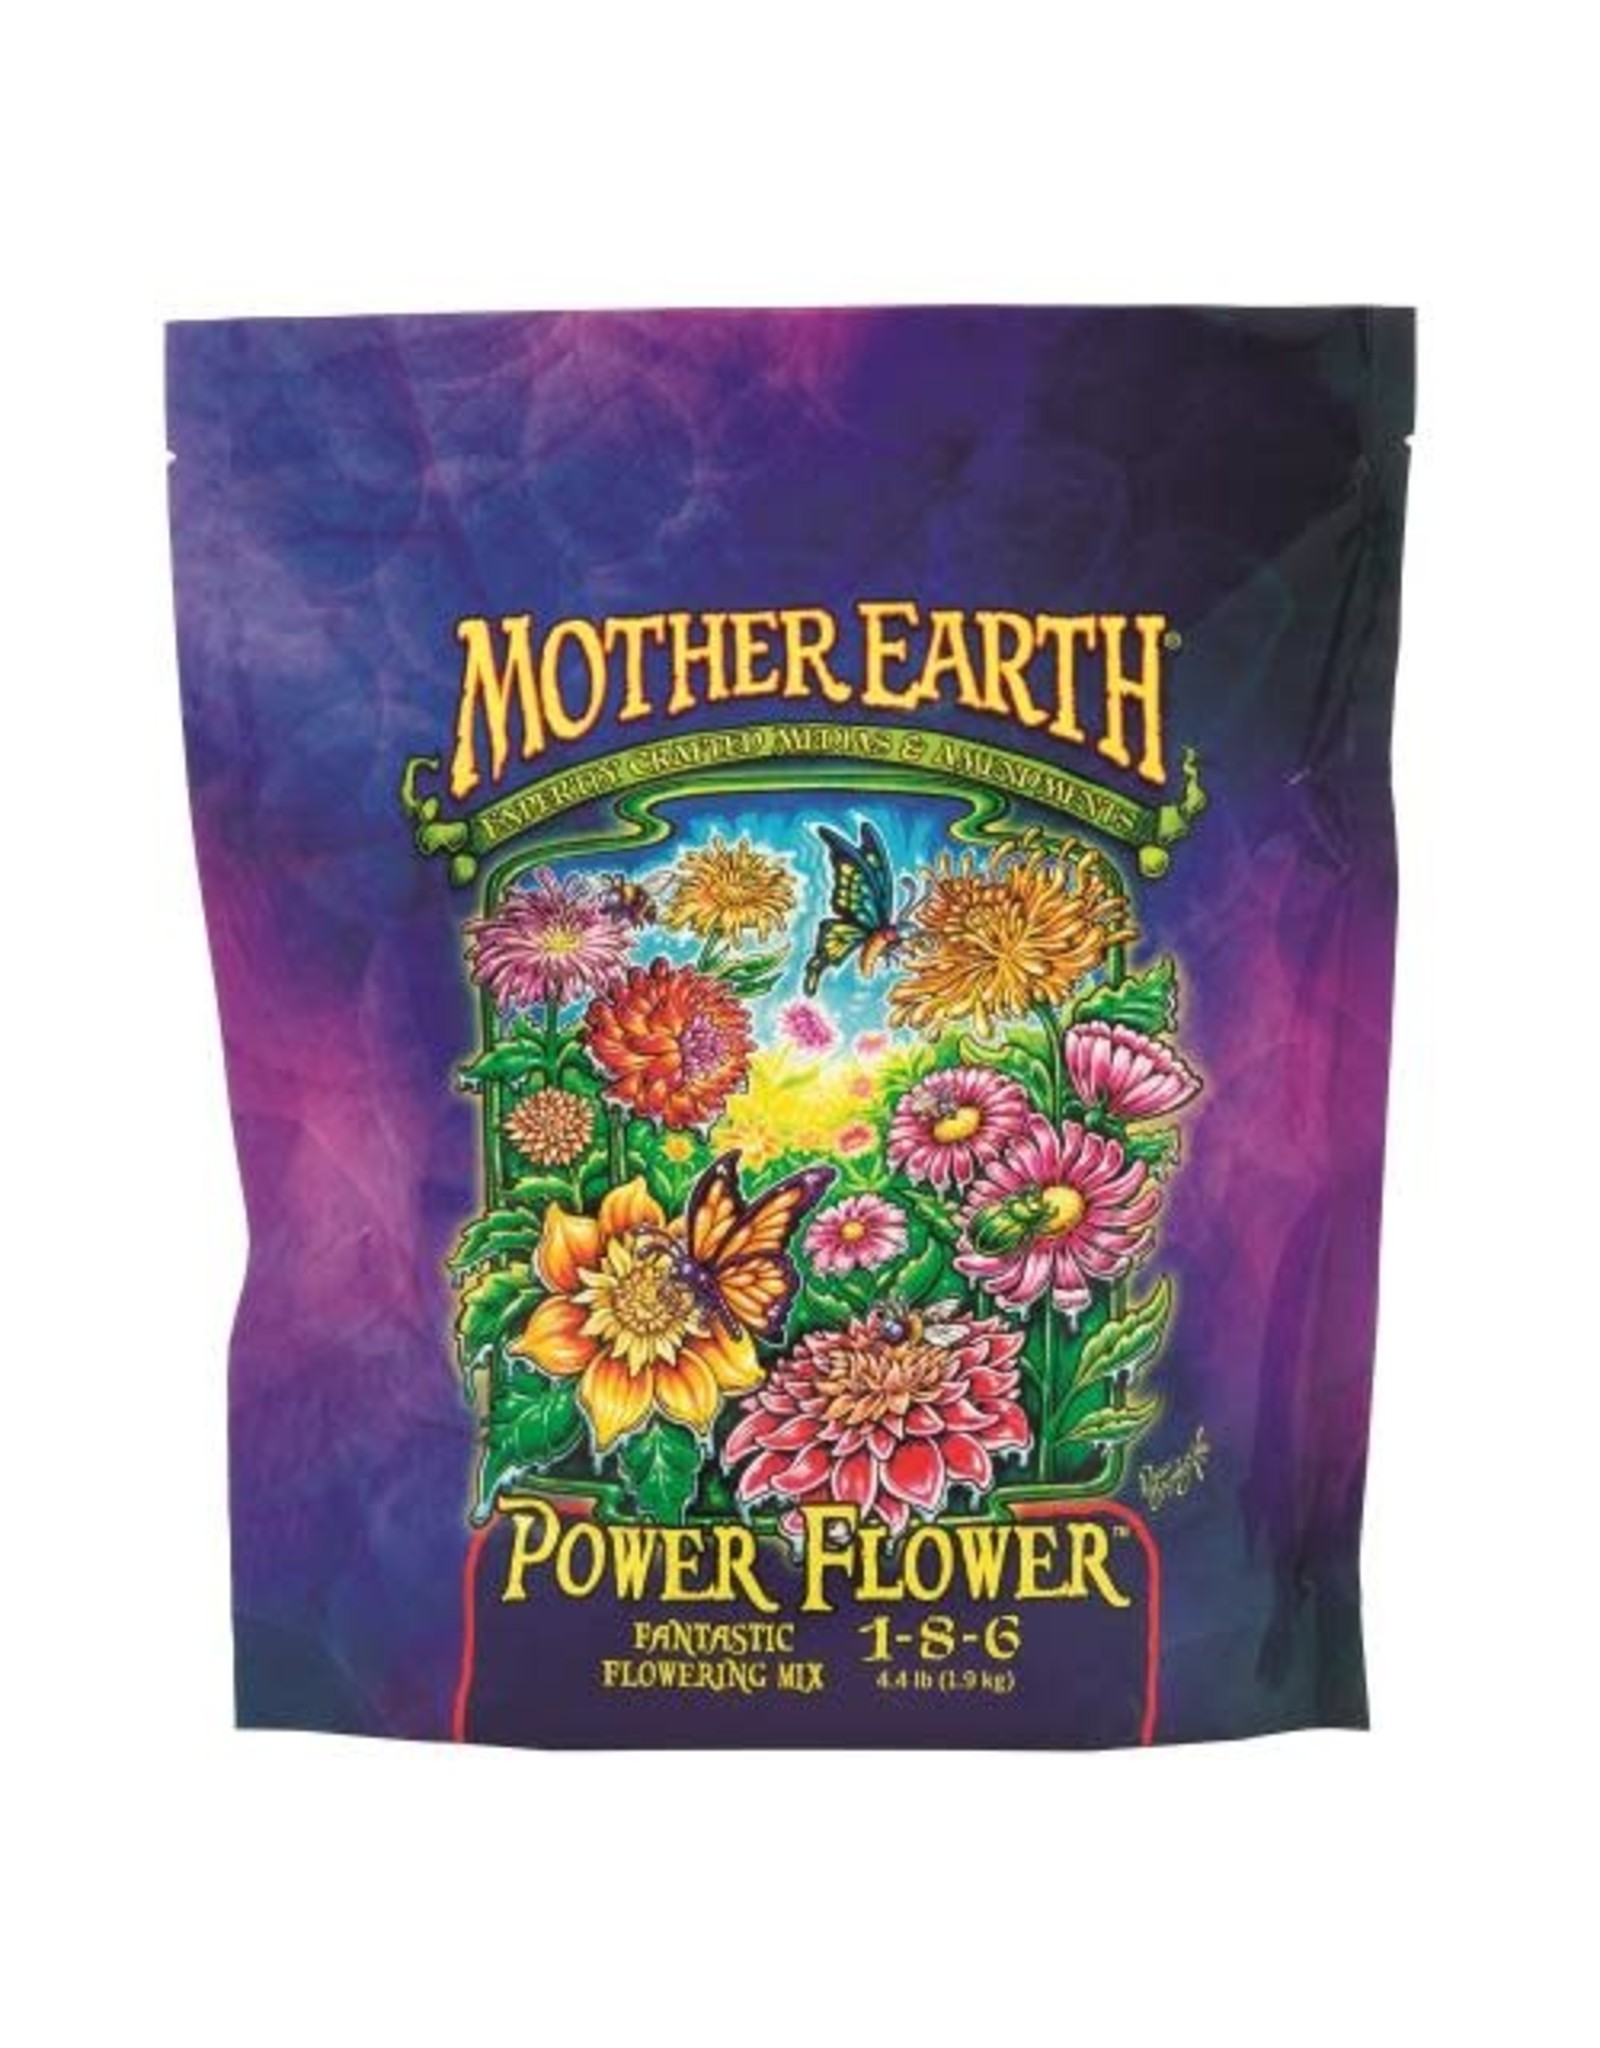 Mother Earth Mother Earth Power Flower Fantastic Flowering Mix 1-8-6